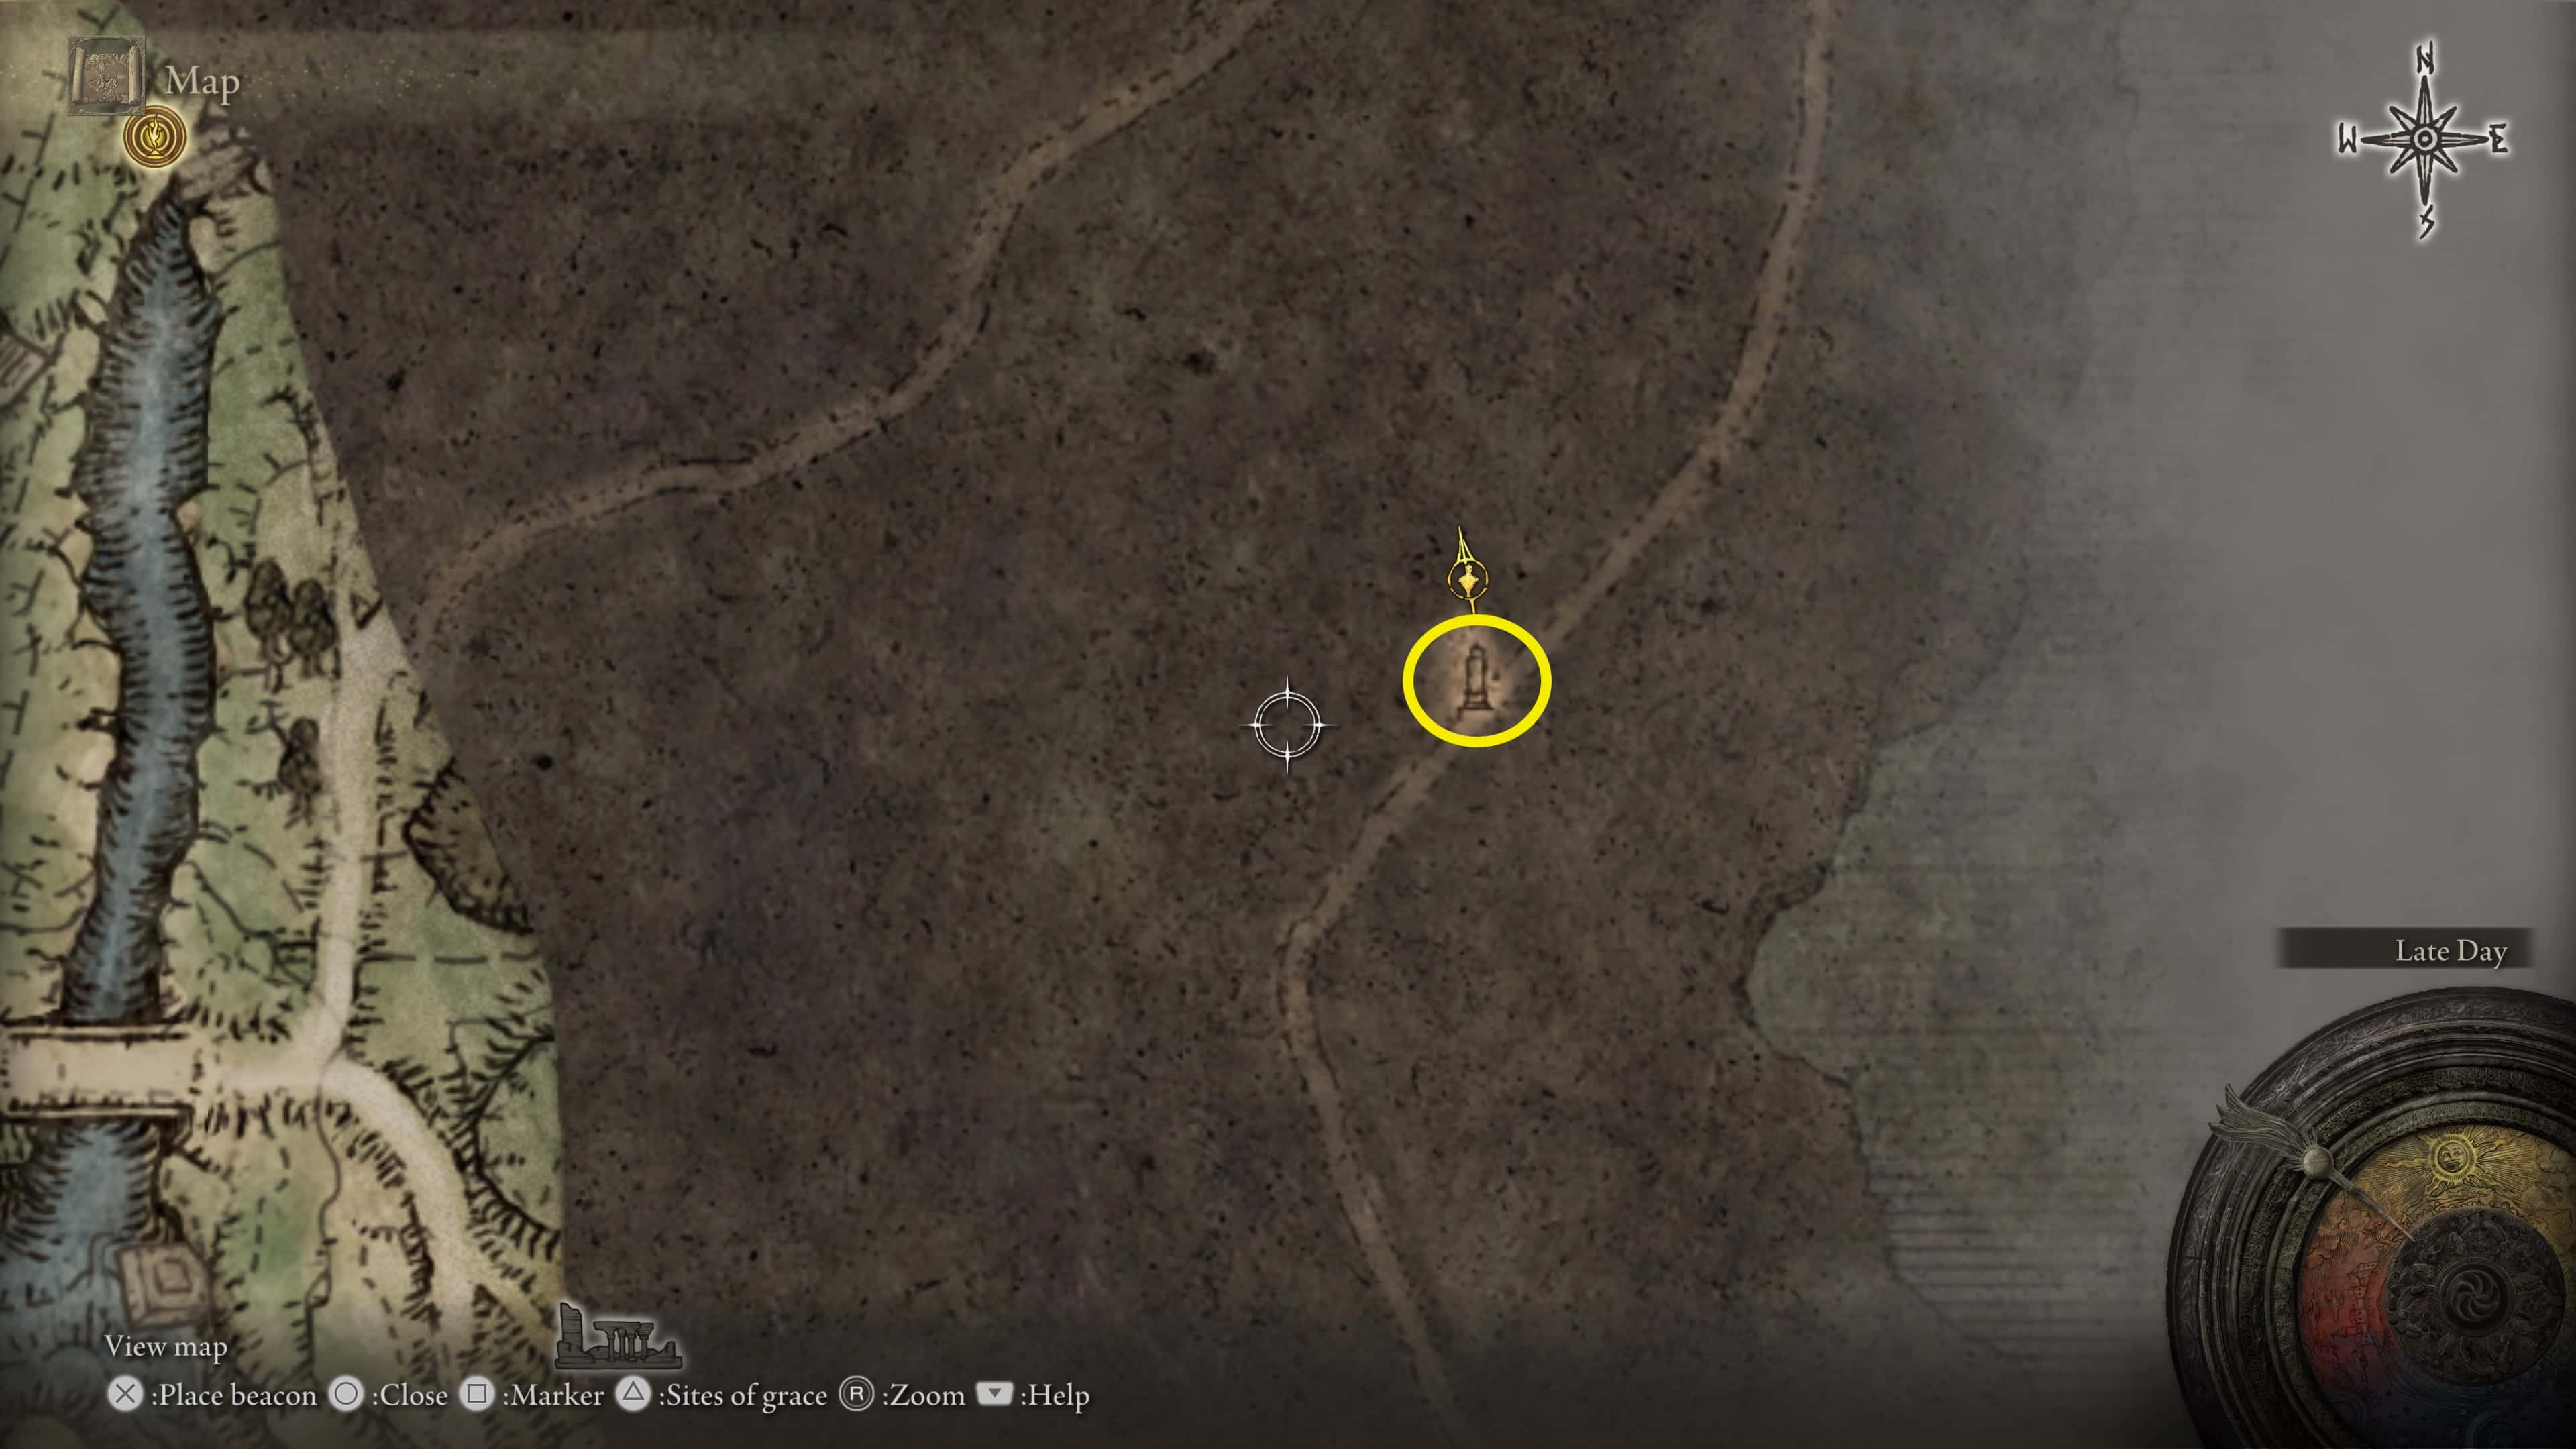 Elden Ring map fragments: the map in Elden Ring shows this icon to denote a Map Fragment.